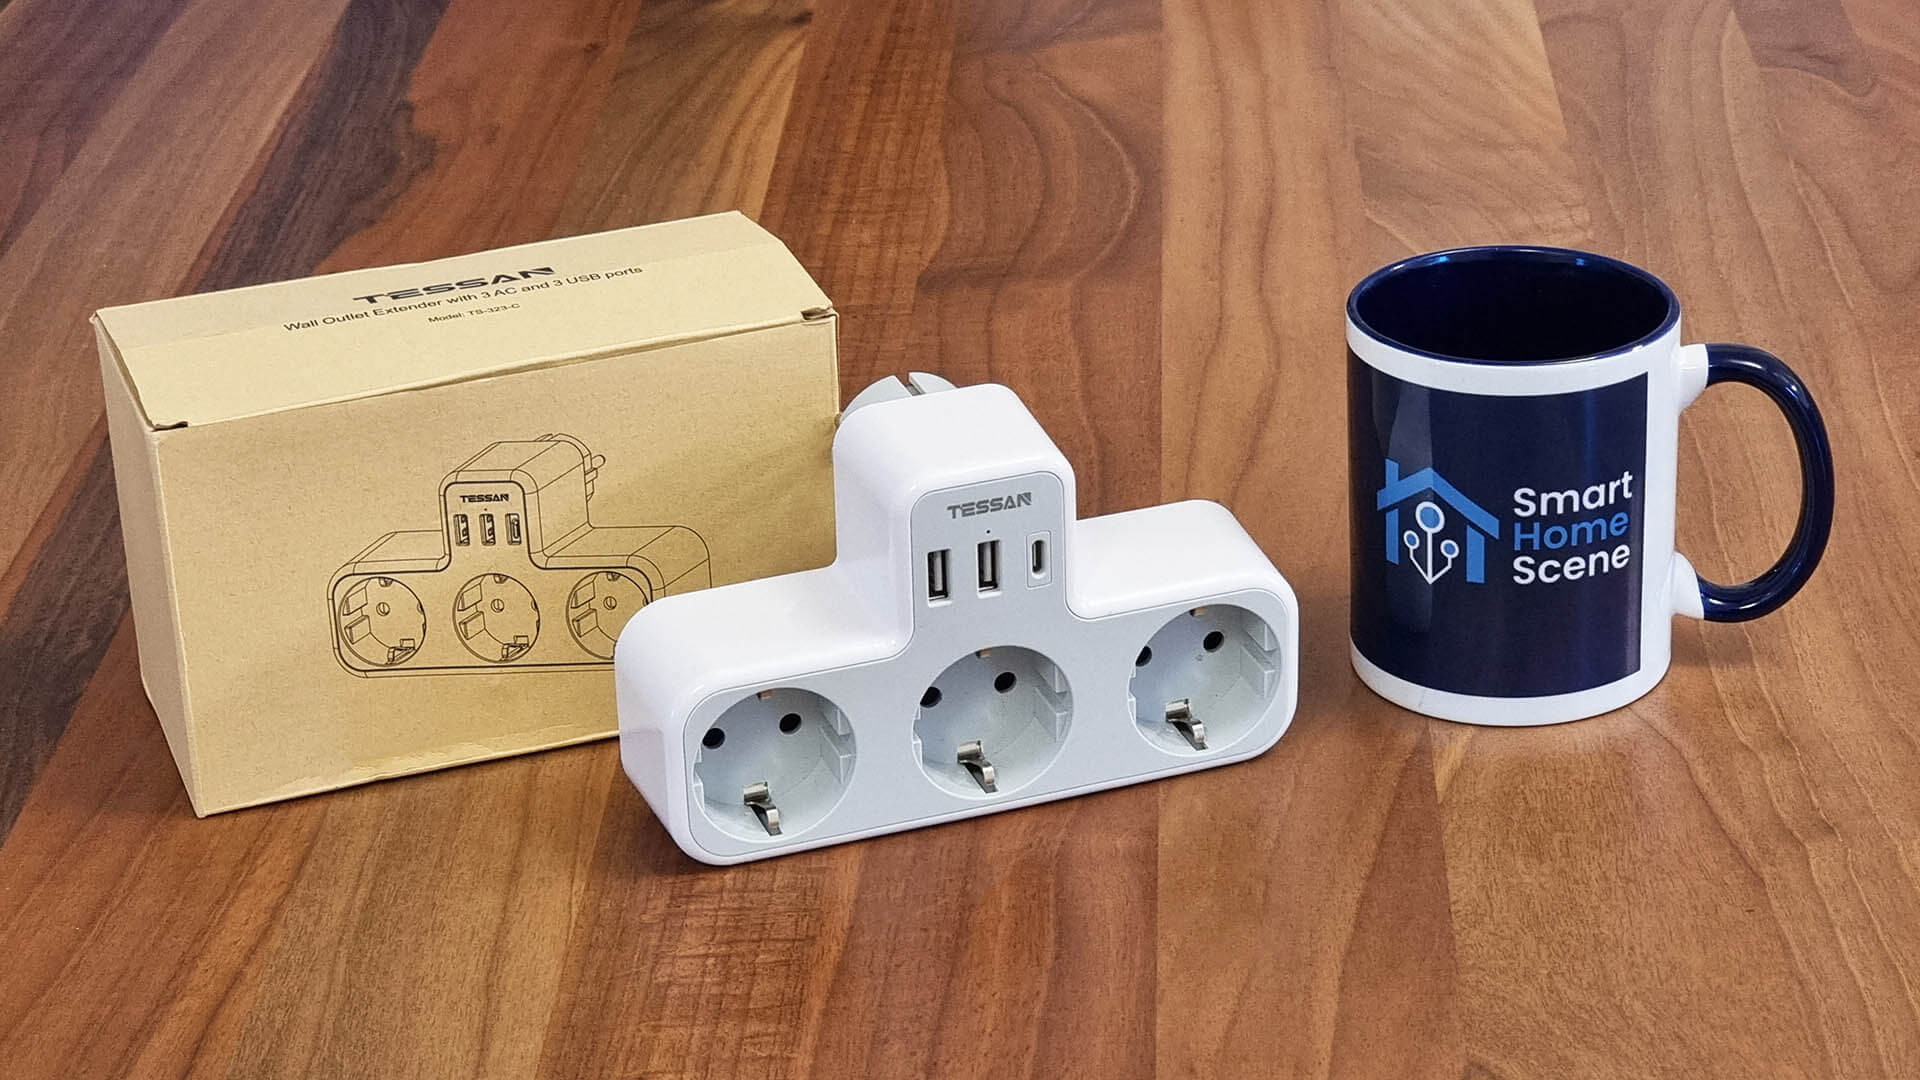 Tessan Wall Socket Extender with USB Ports Featured